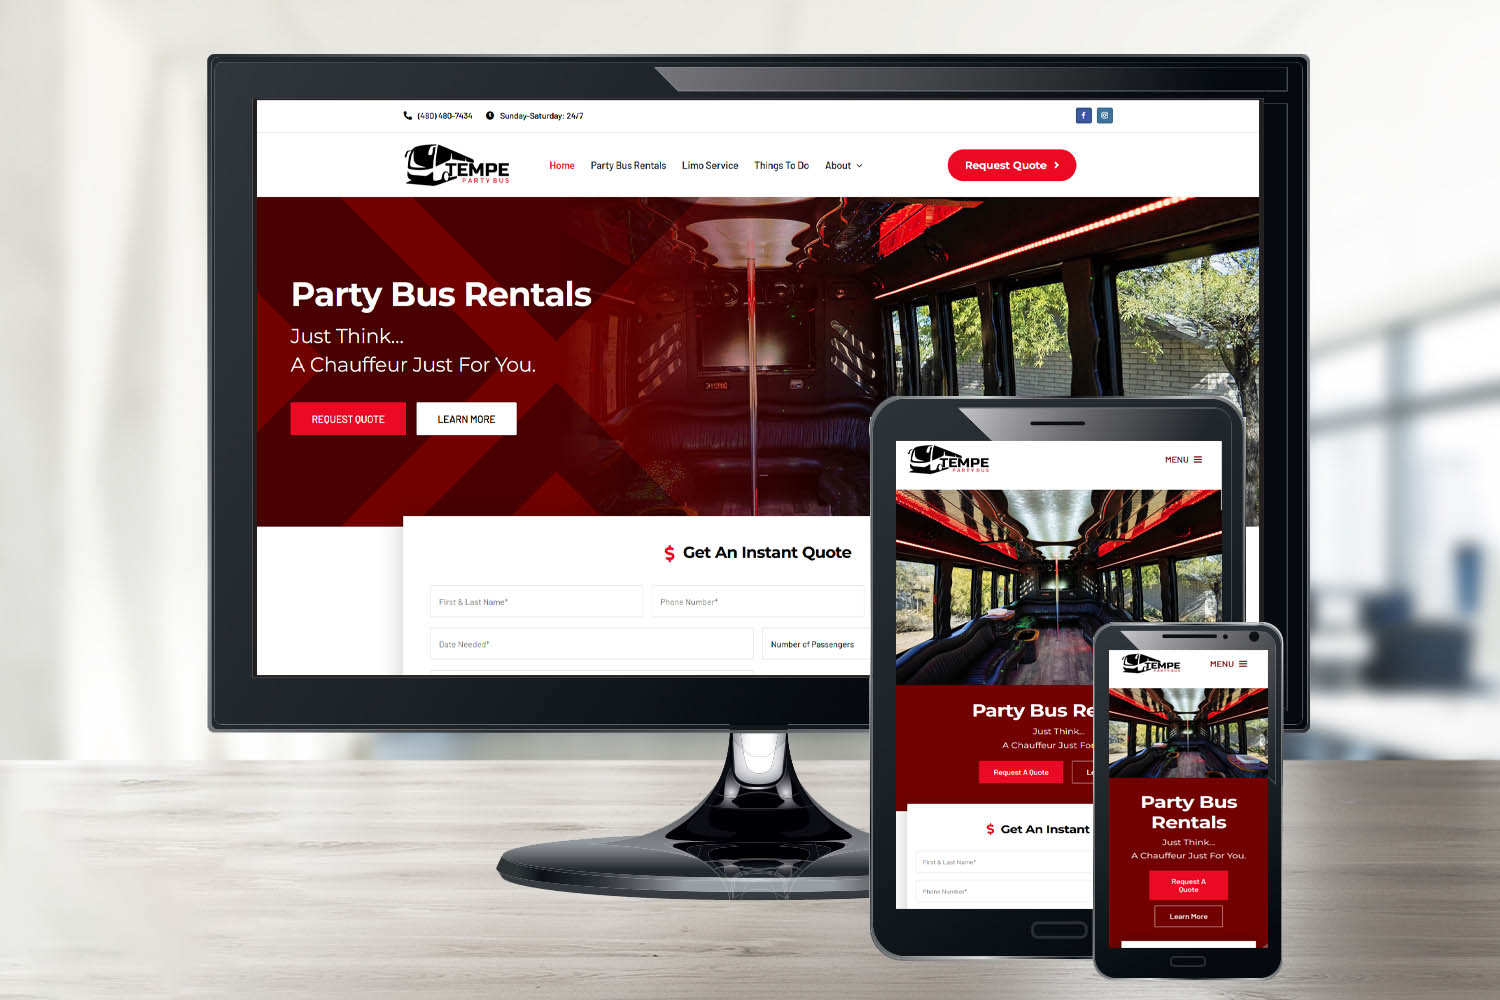 Tempe Party Bus's website shown on multiple devices